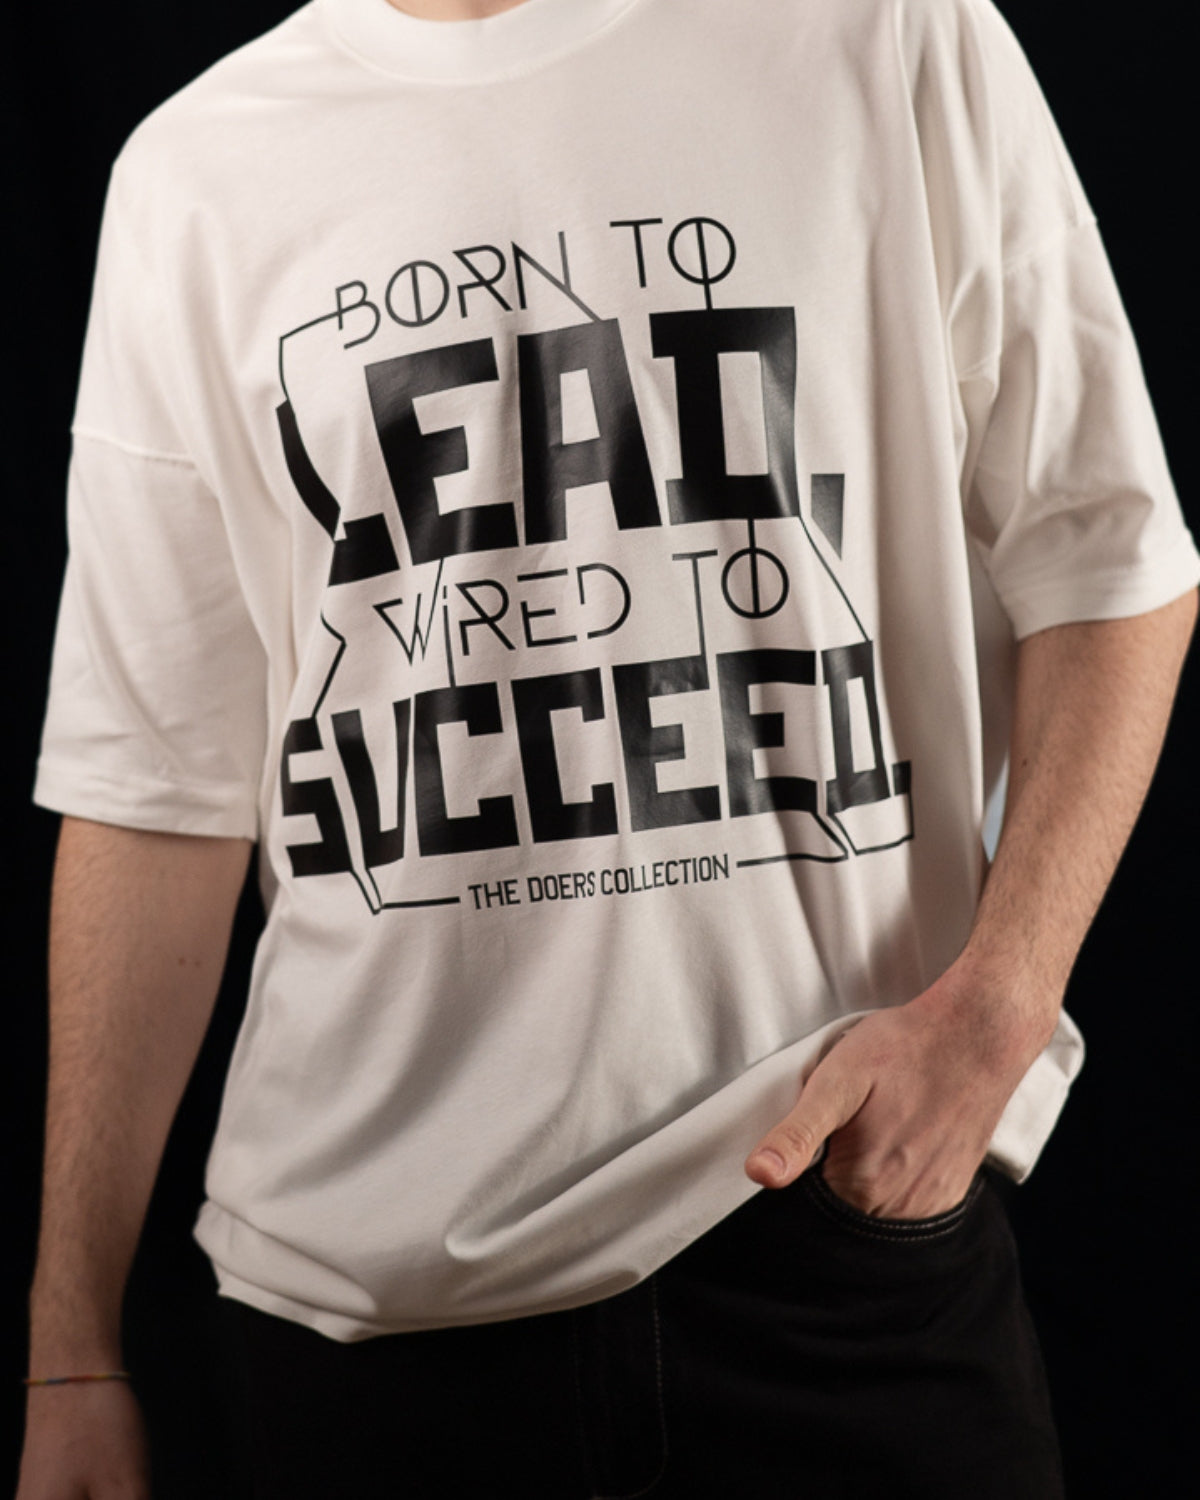 Tricou Premium Bumbac, Imprimeu “Born to Lead, Wired to Succeed”